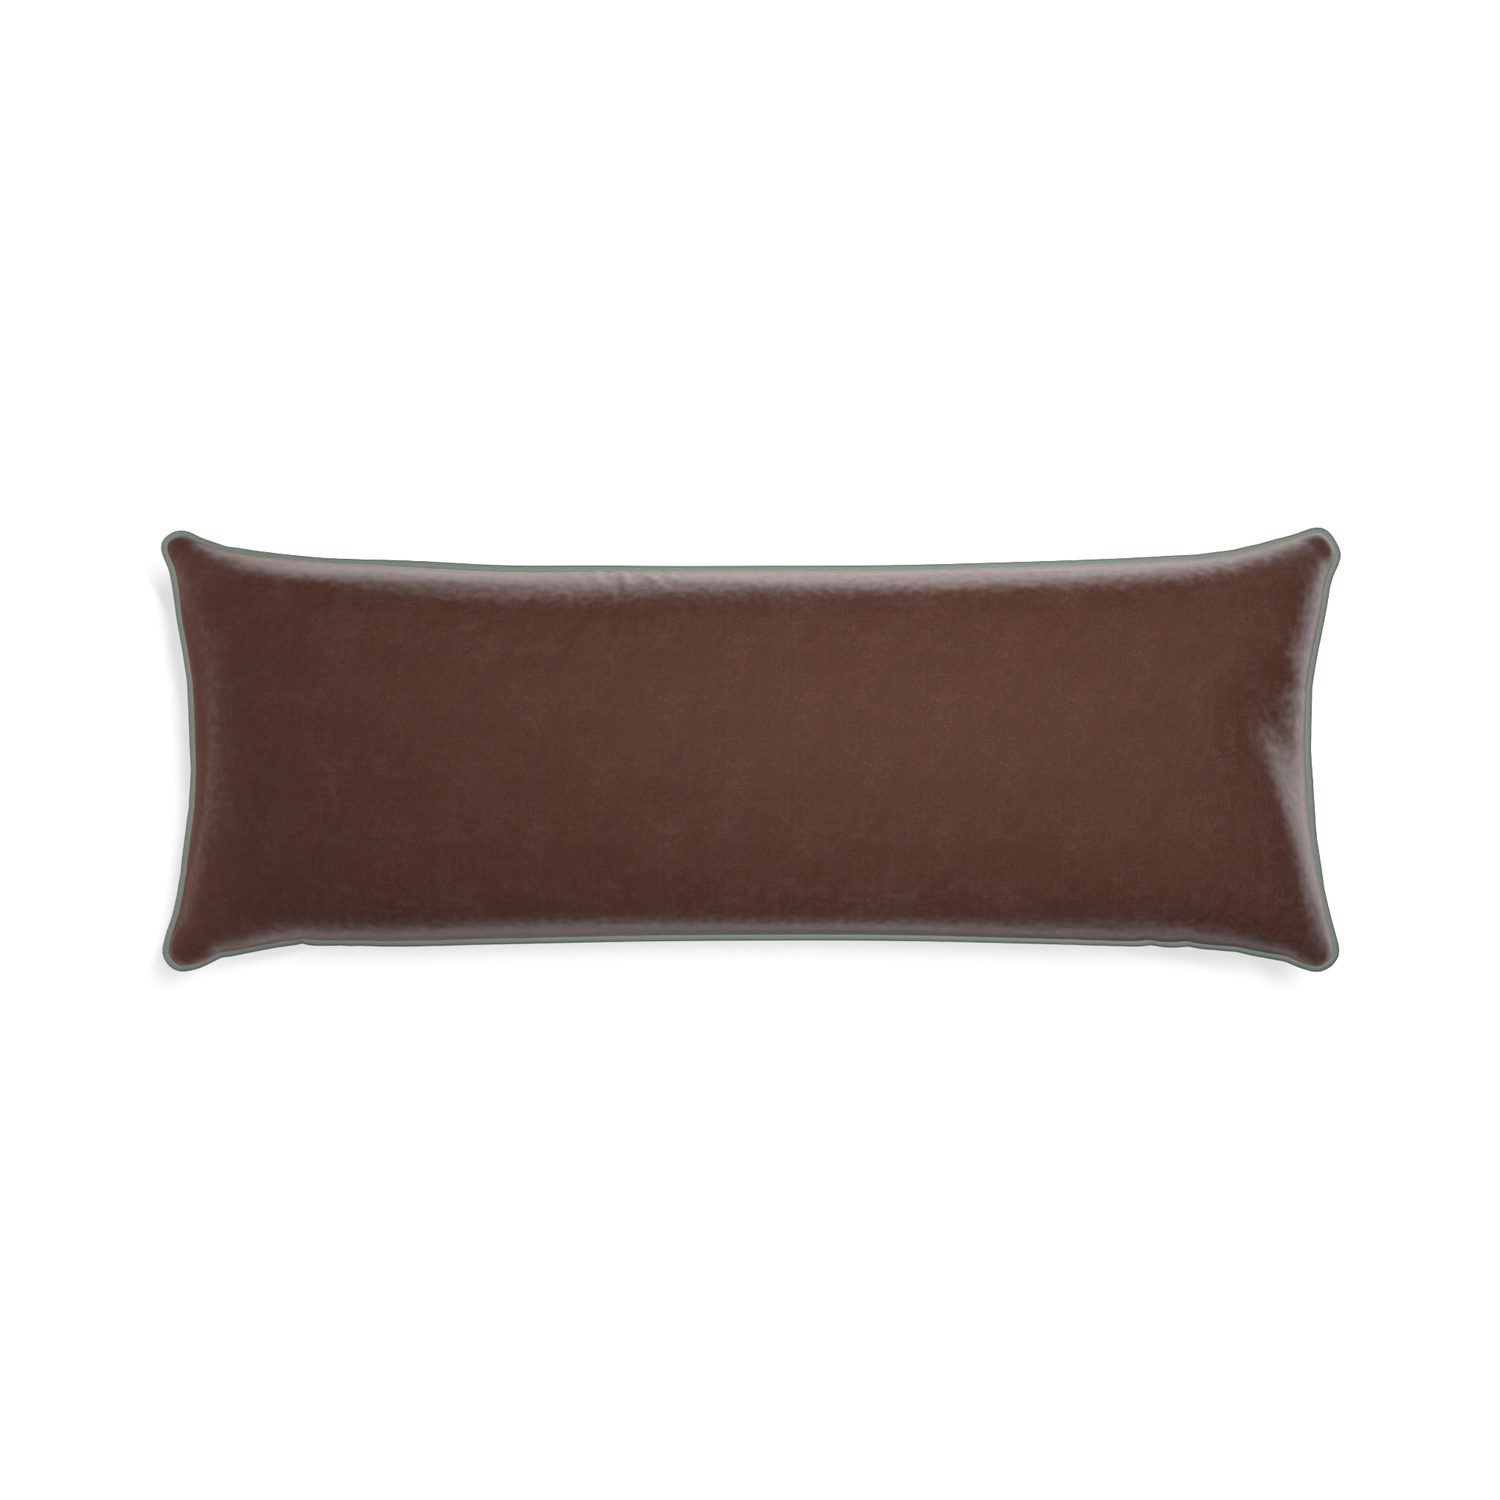 Xl-lumbar walnut velvet custom brownpillow with sage piping on white background